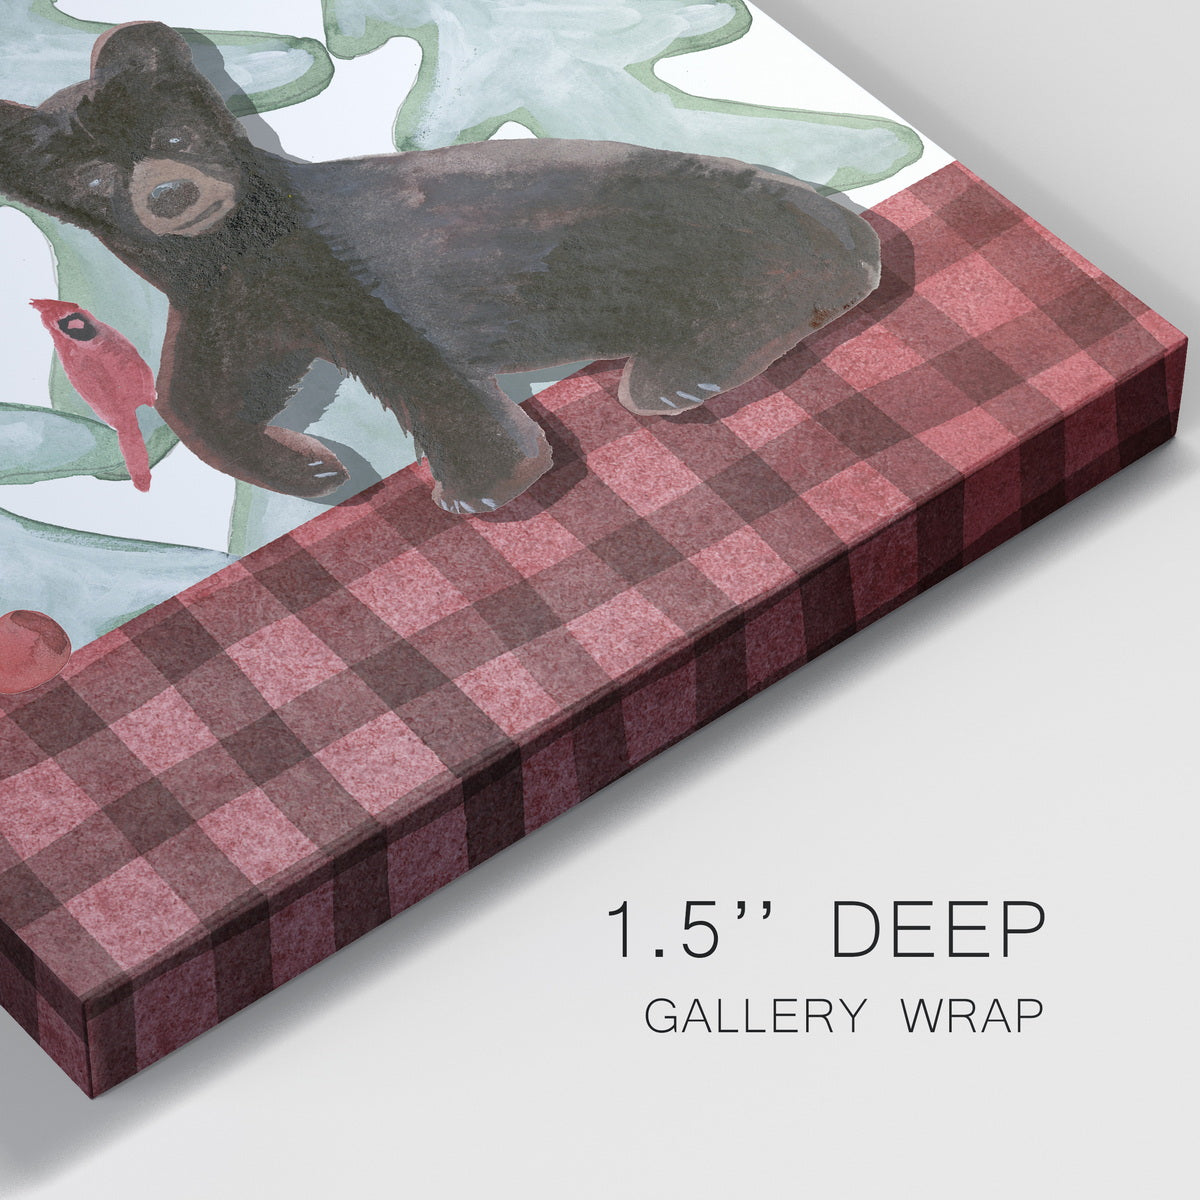 A Very Beary Christmas II-Premium Gallery Wrapped Canvas - Ready to Hang